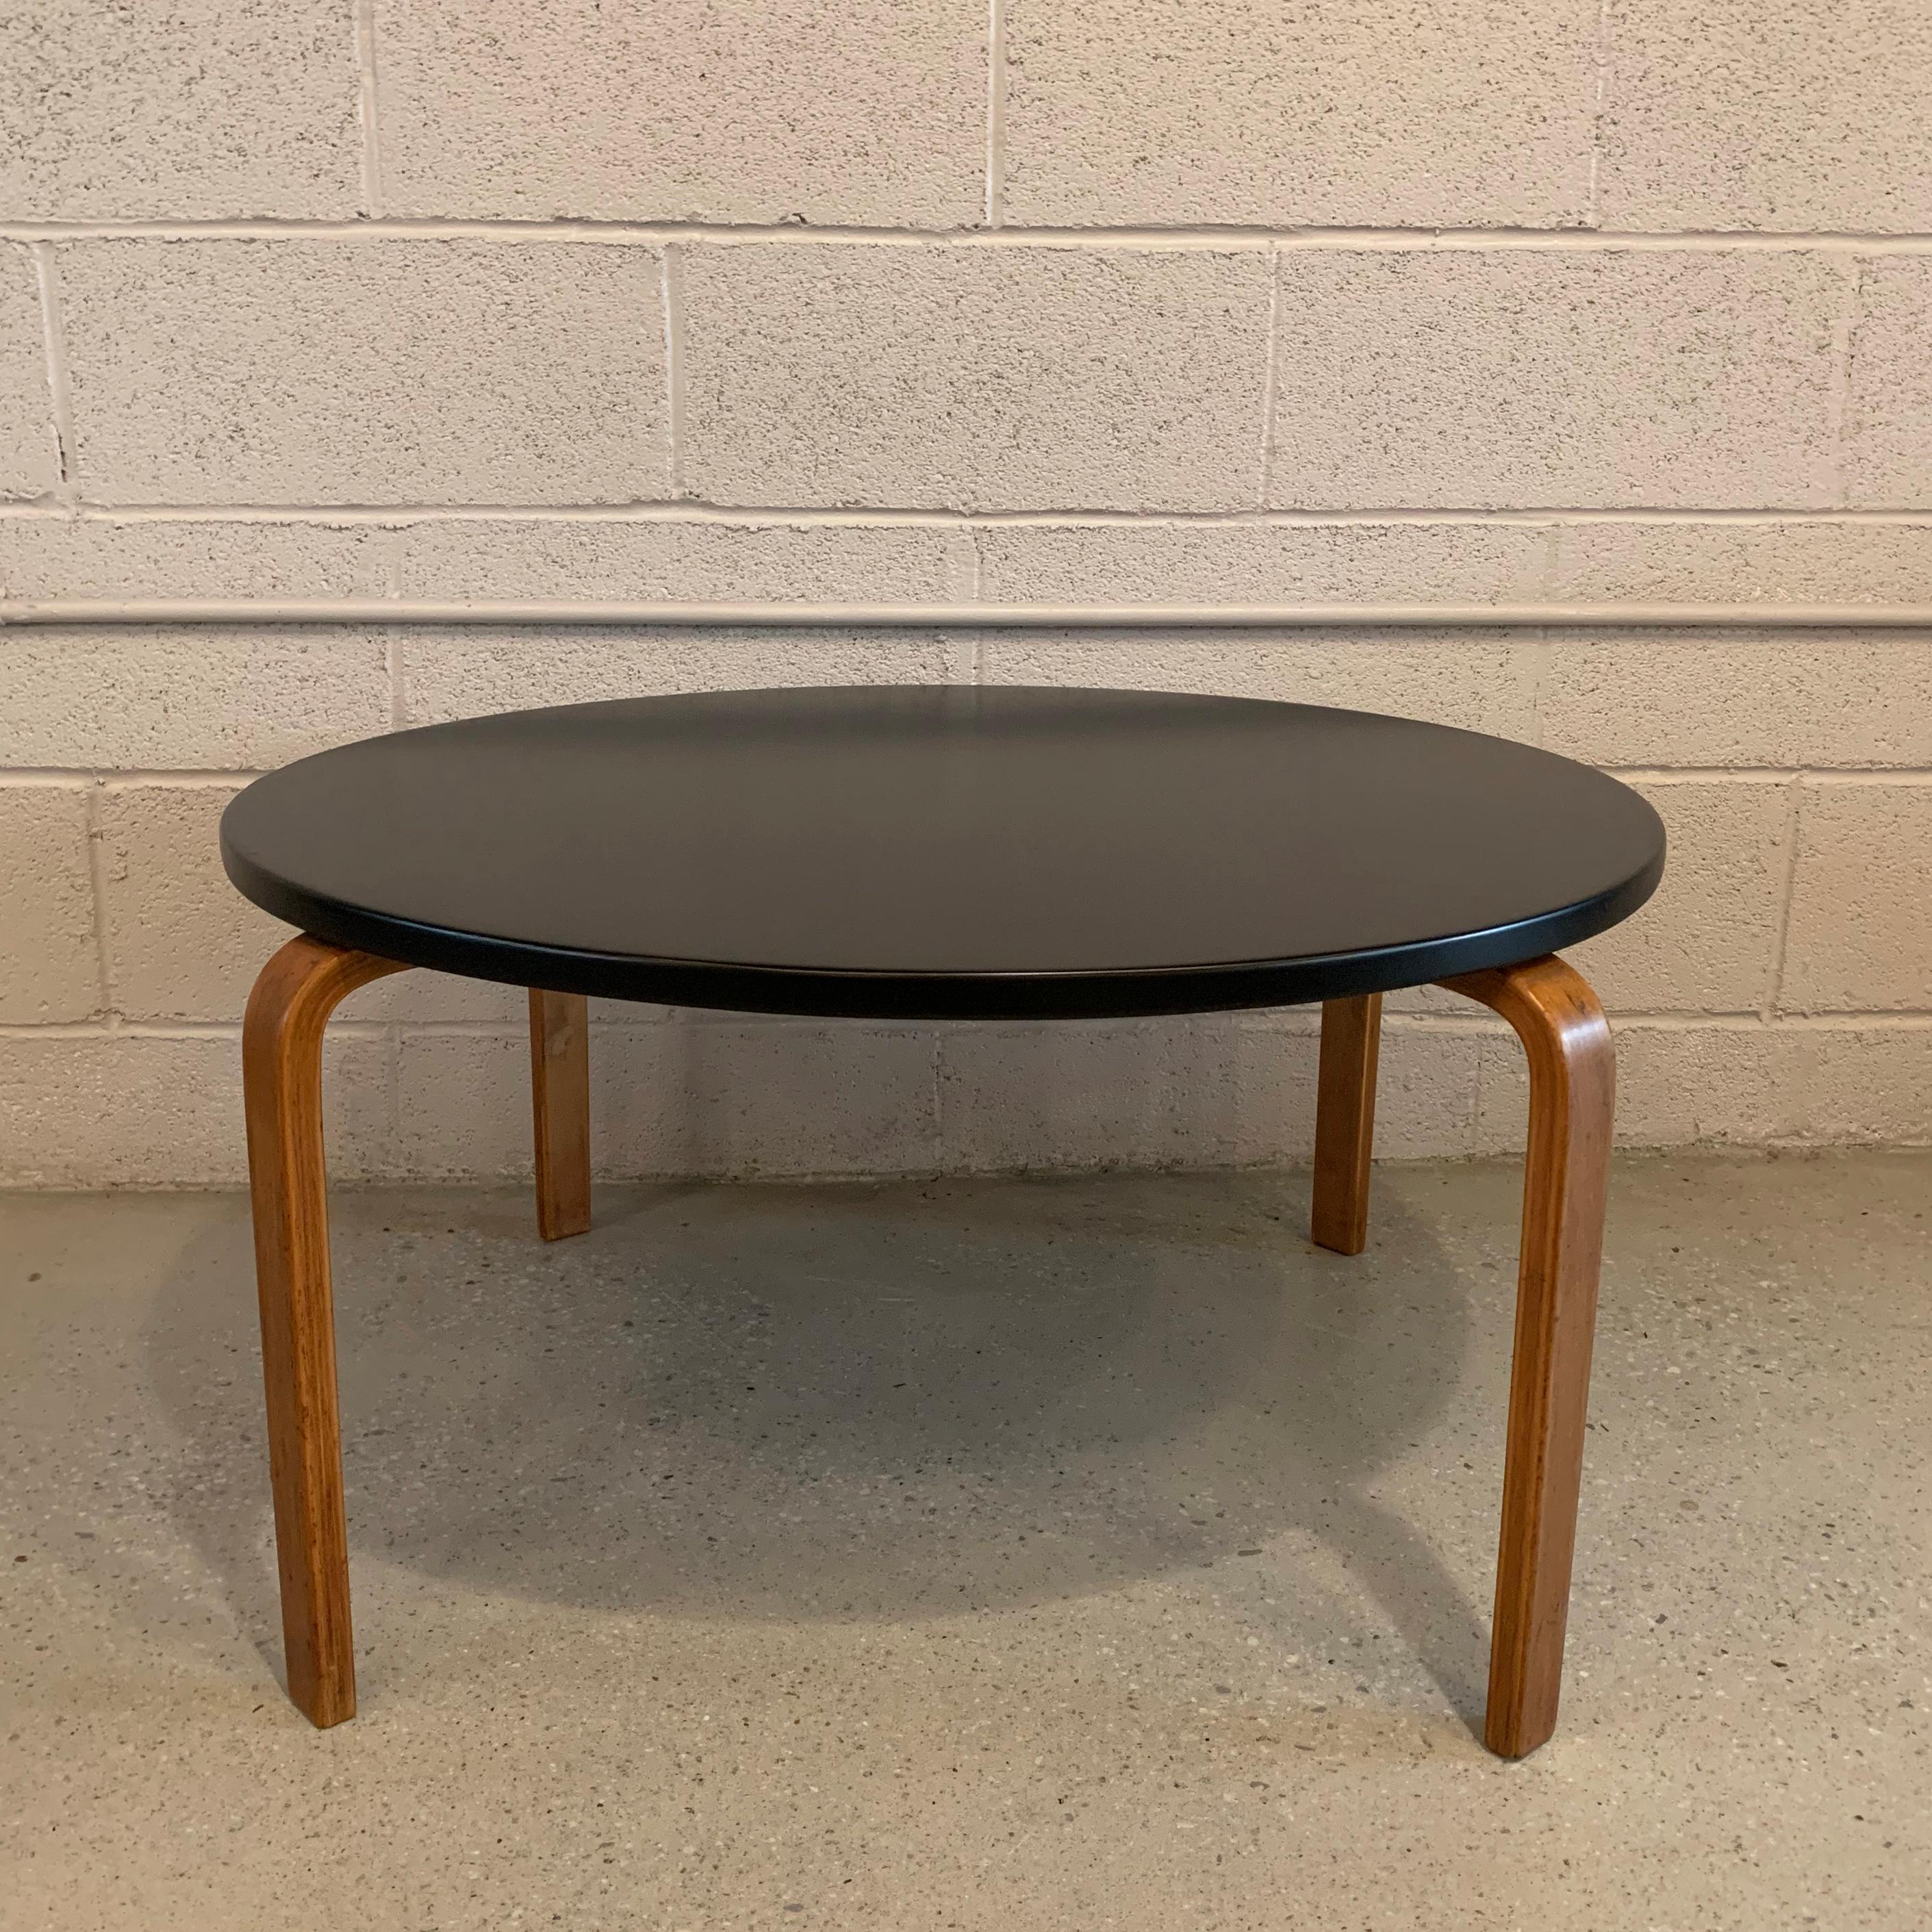 Round, bent brich ply coffee table by Alvar Aalto for Artek features a black lacquered top with natural legs.